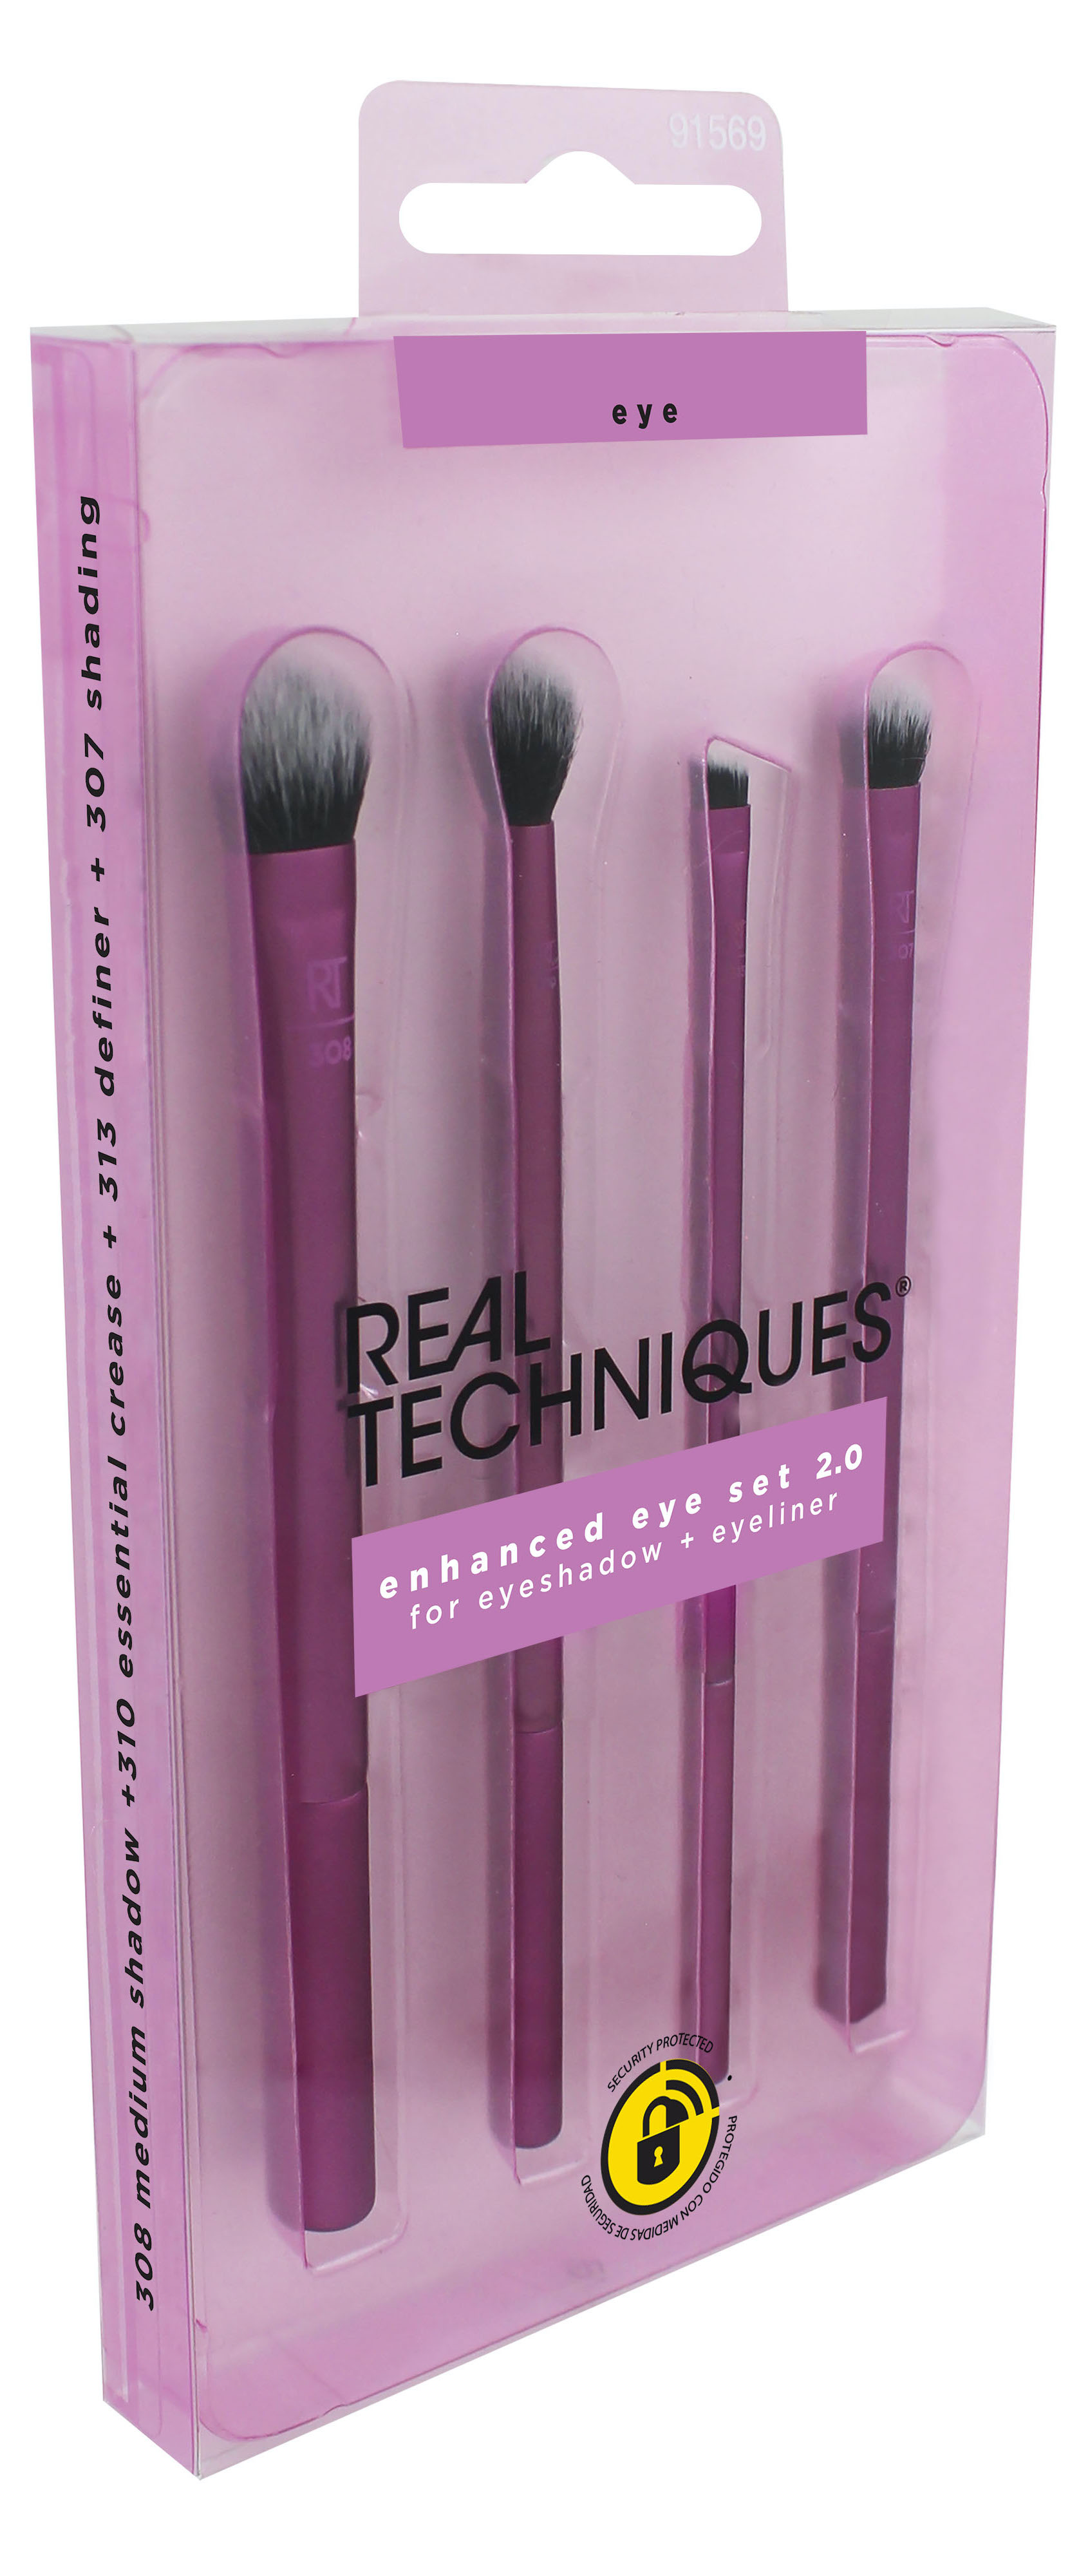 Real Techniques Enhanced Eye Makeup Brush Set, 4 Pieces - image 3 of 6